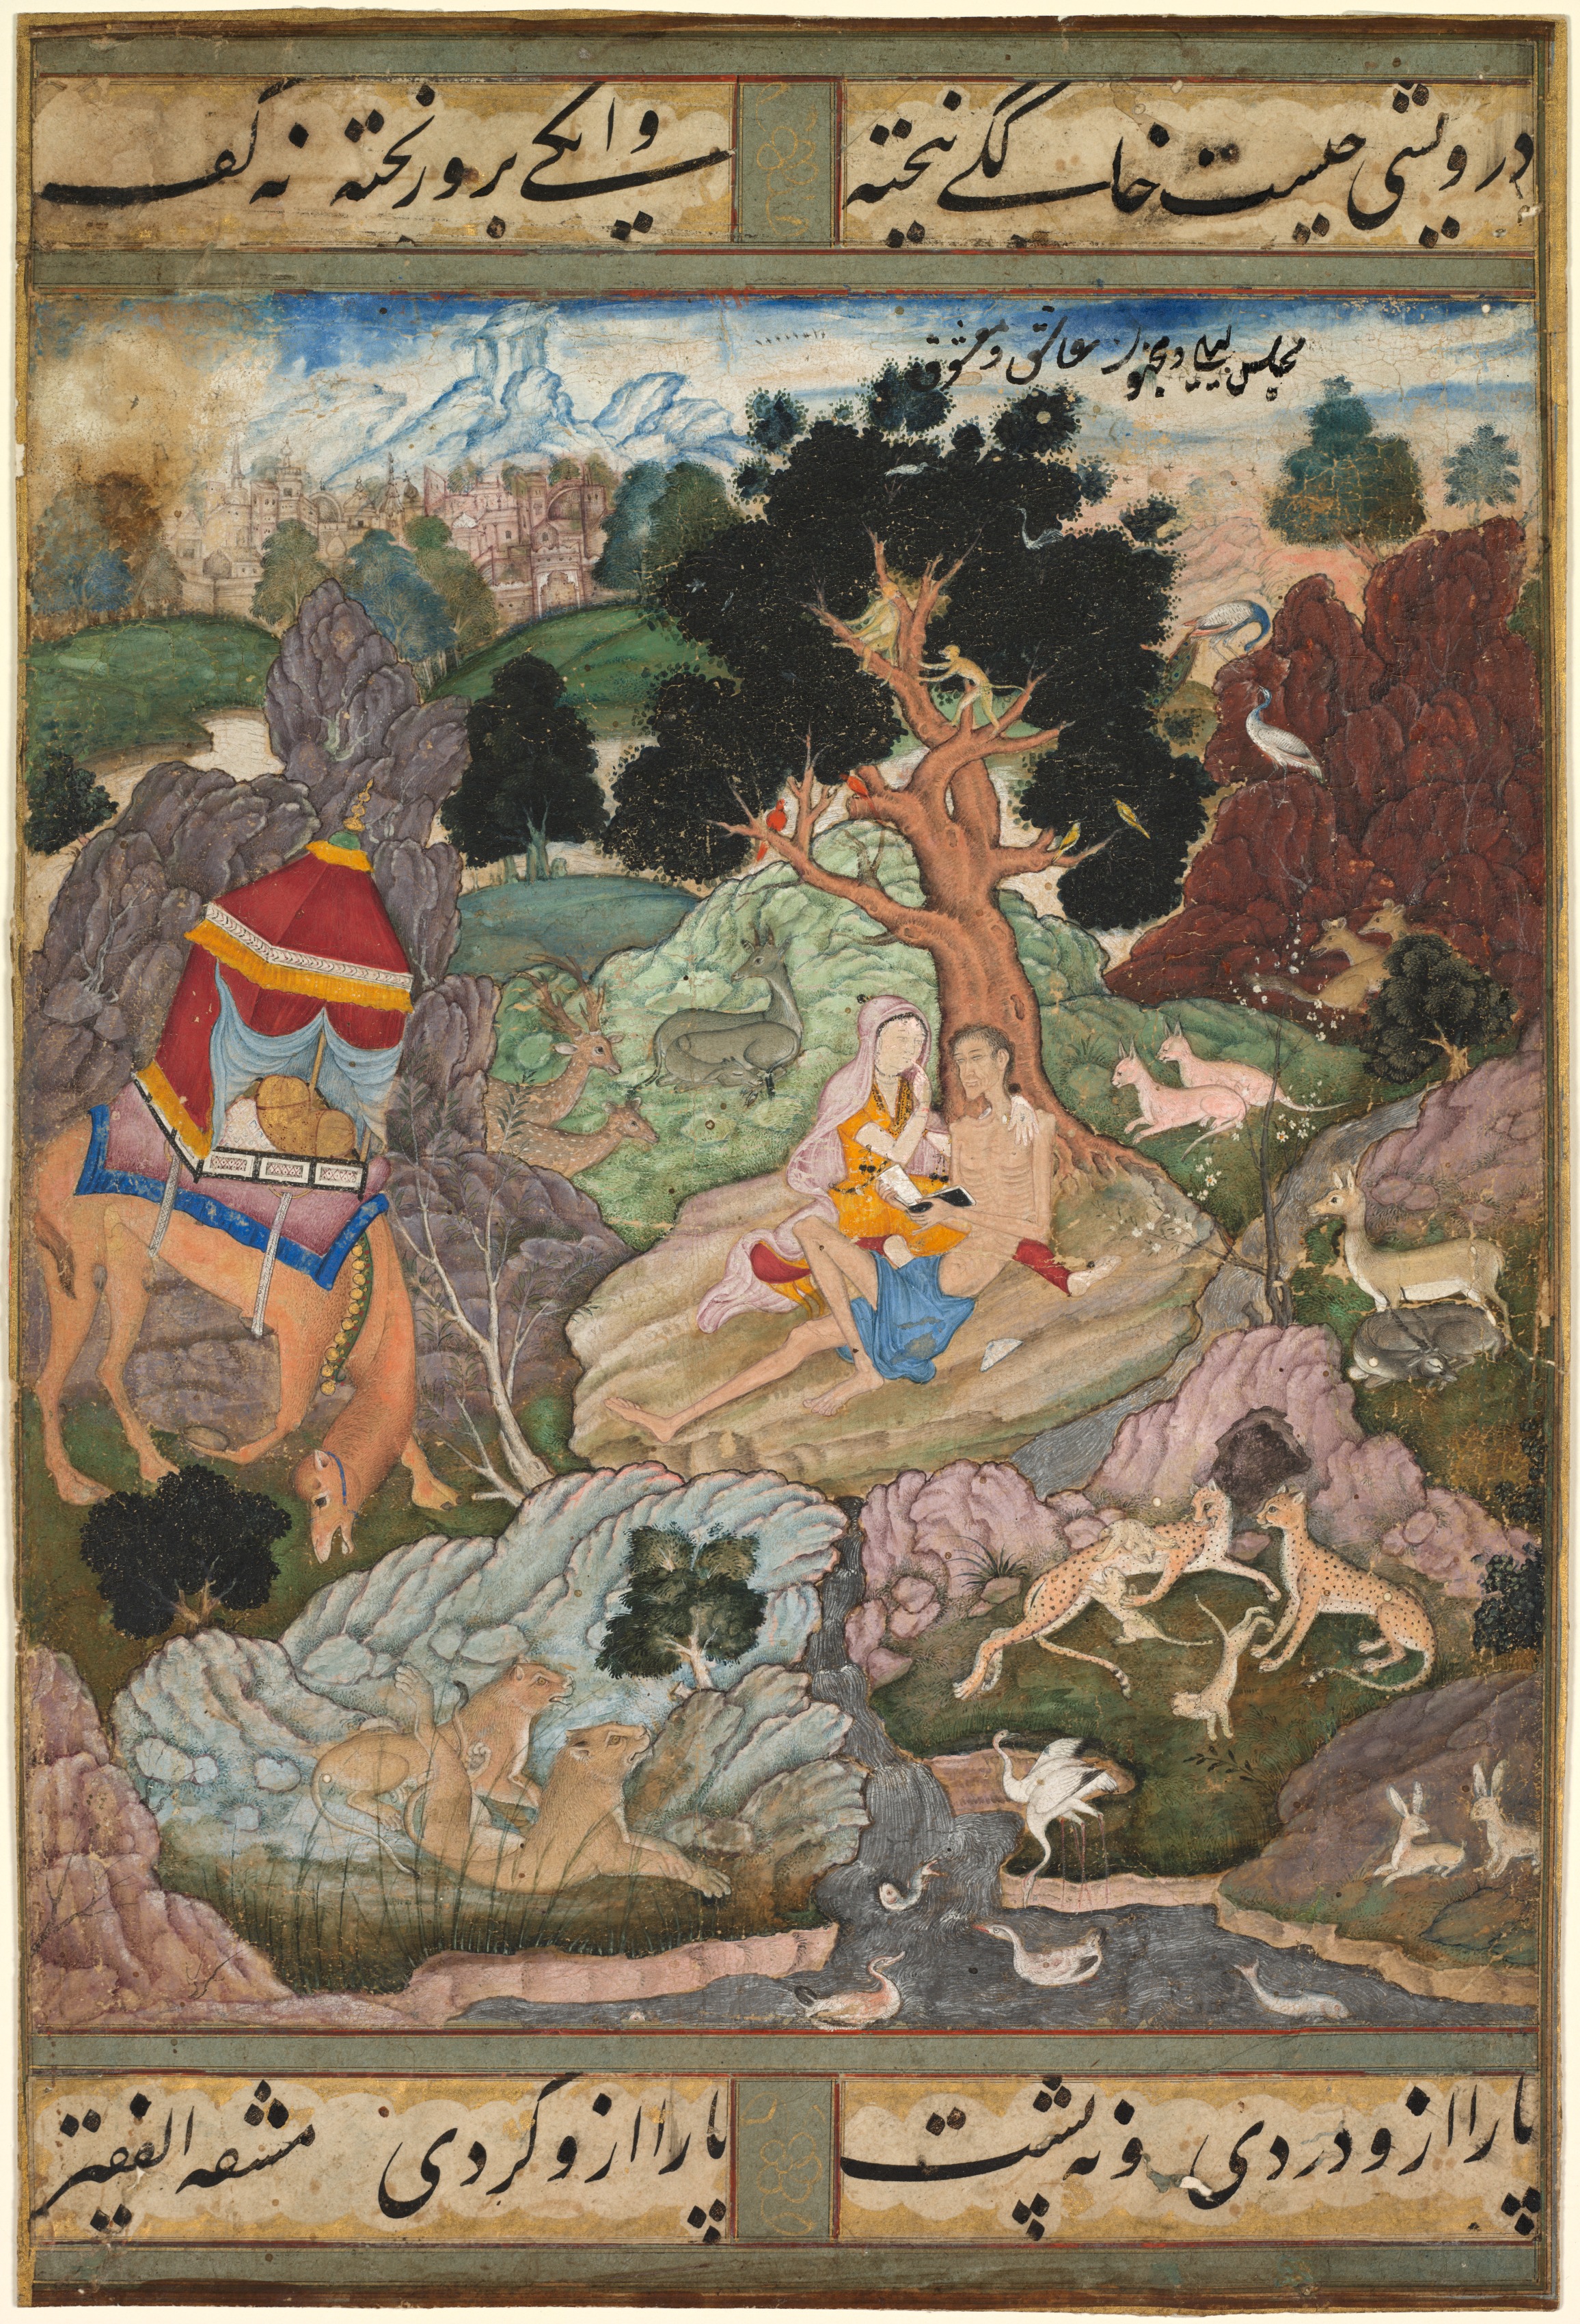 Layla and Majnun in the wilderness with animals, from a Khamsa (Quintet) of Amir Khusrau Dihlavi